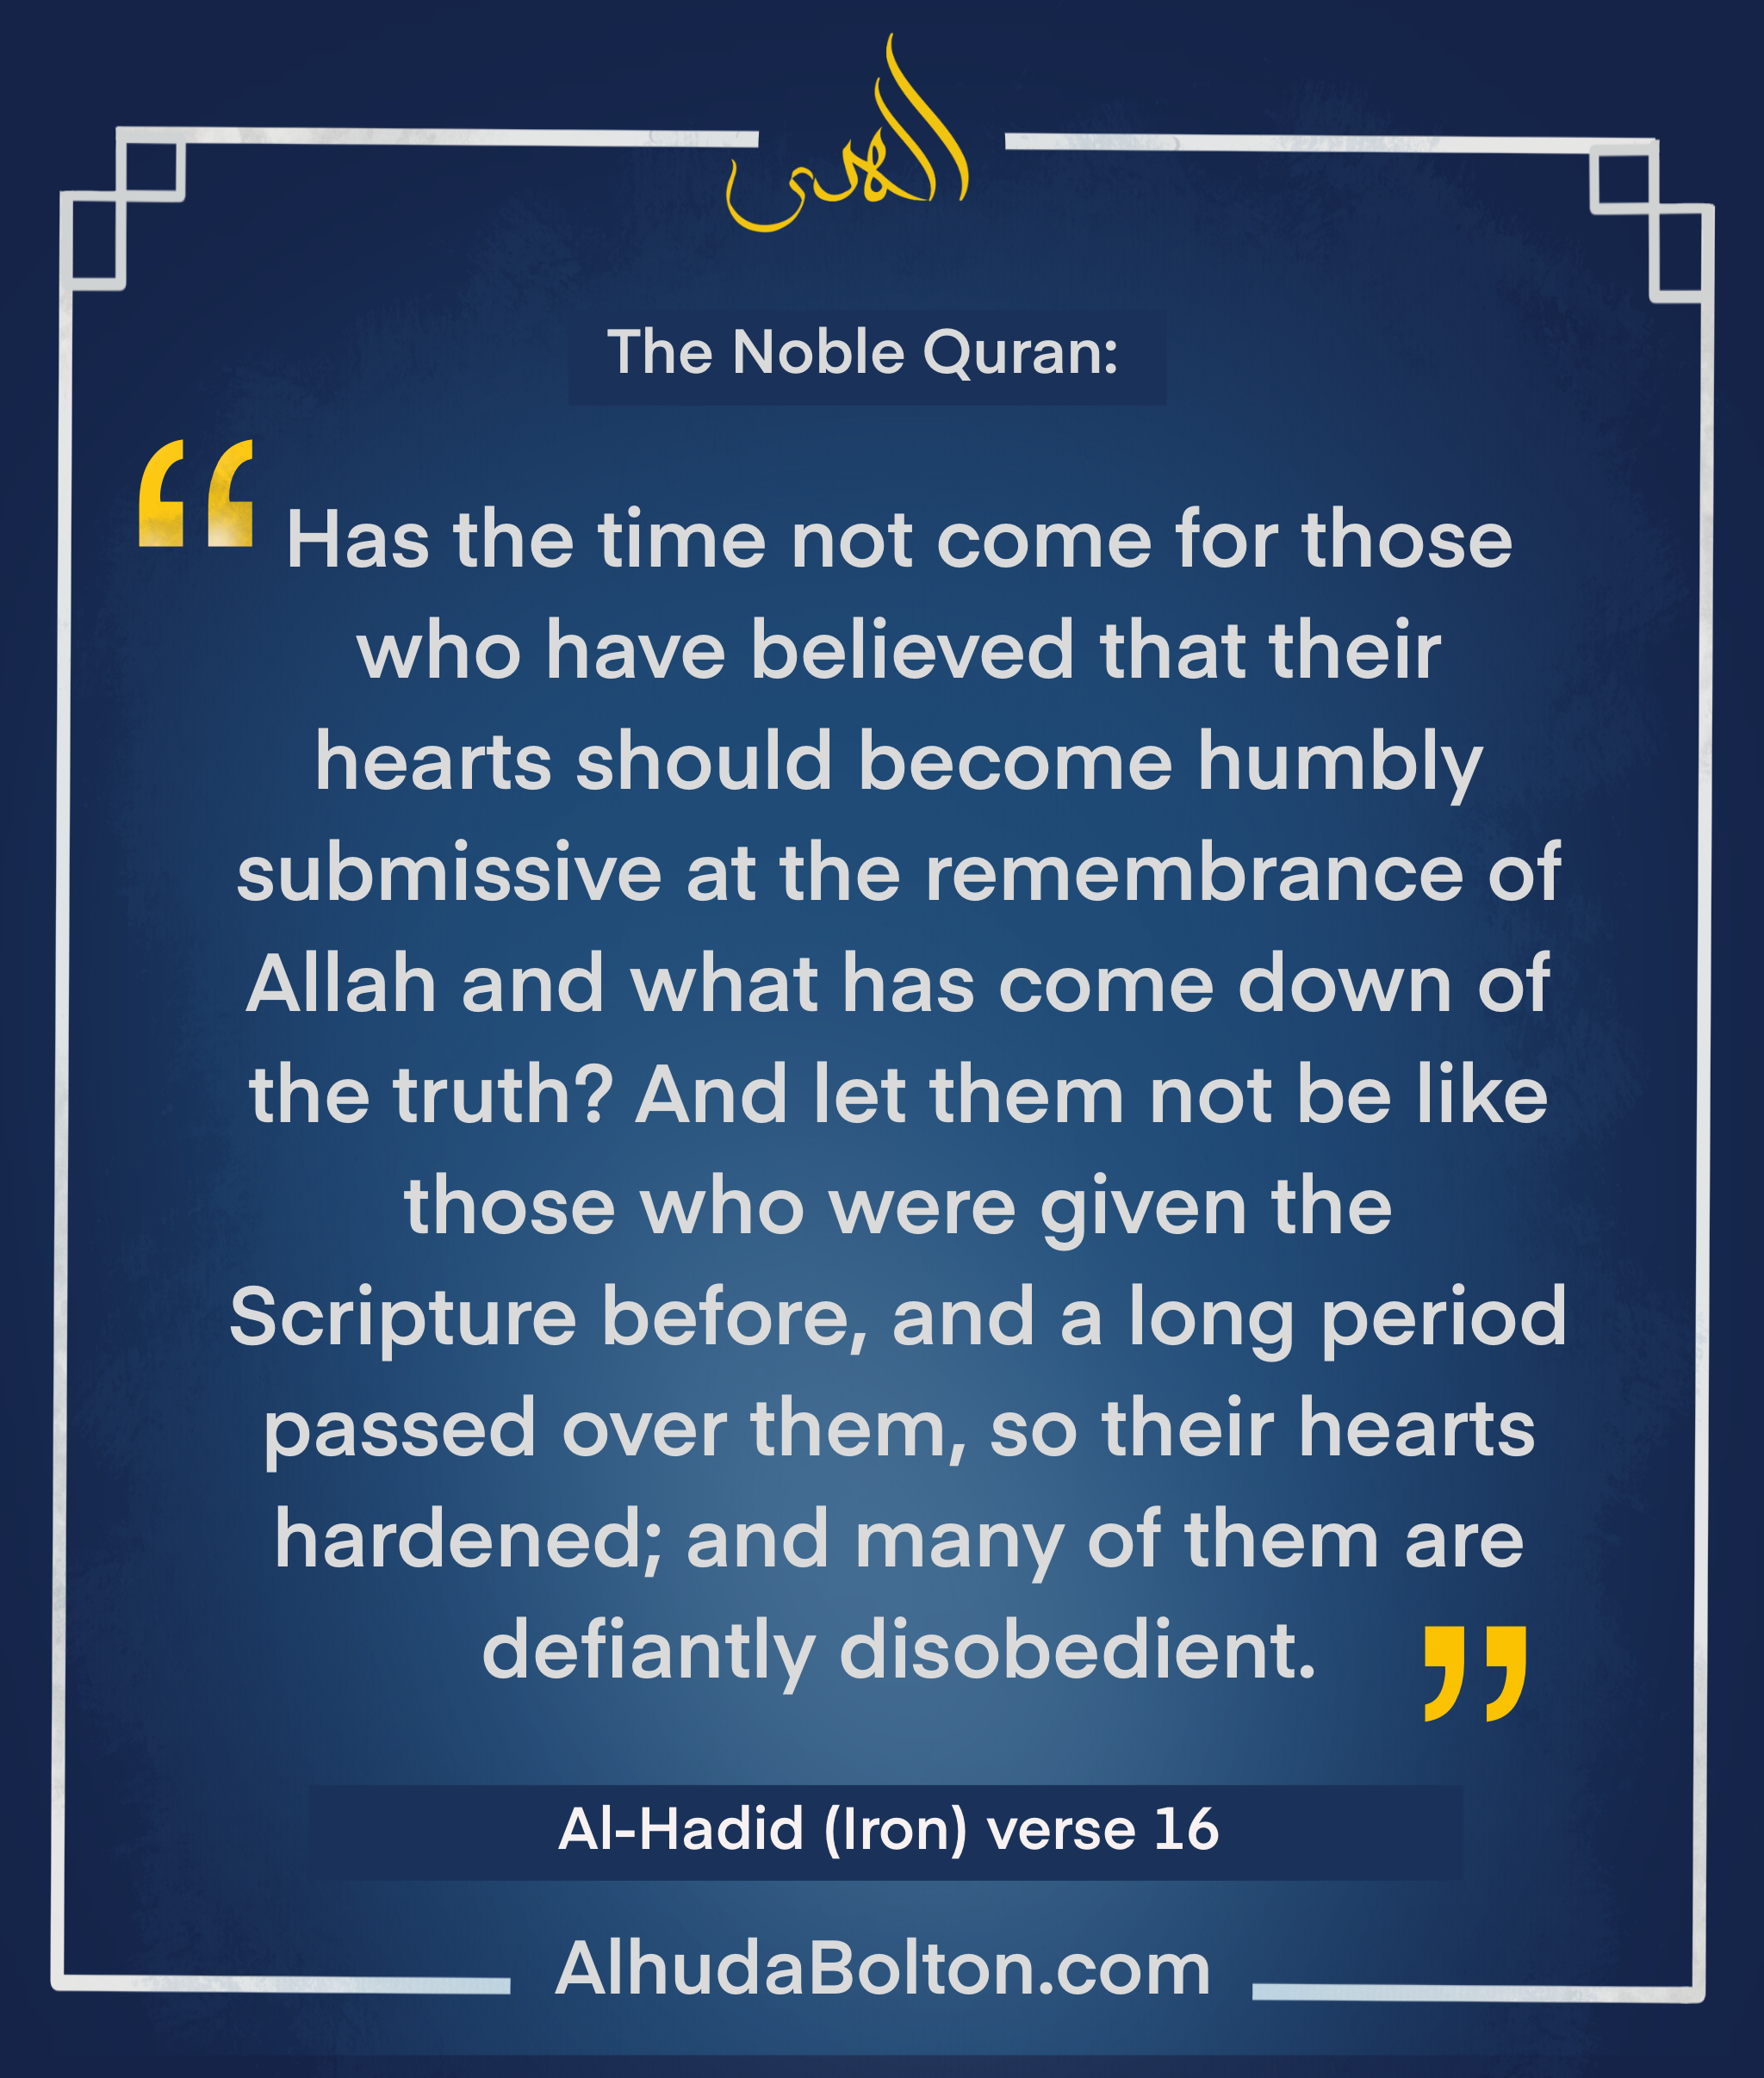 Quran verse: “Has the time not come…”